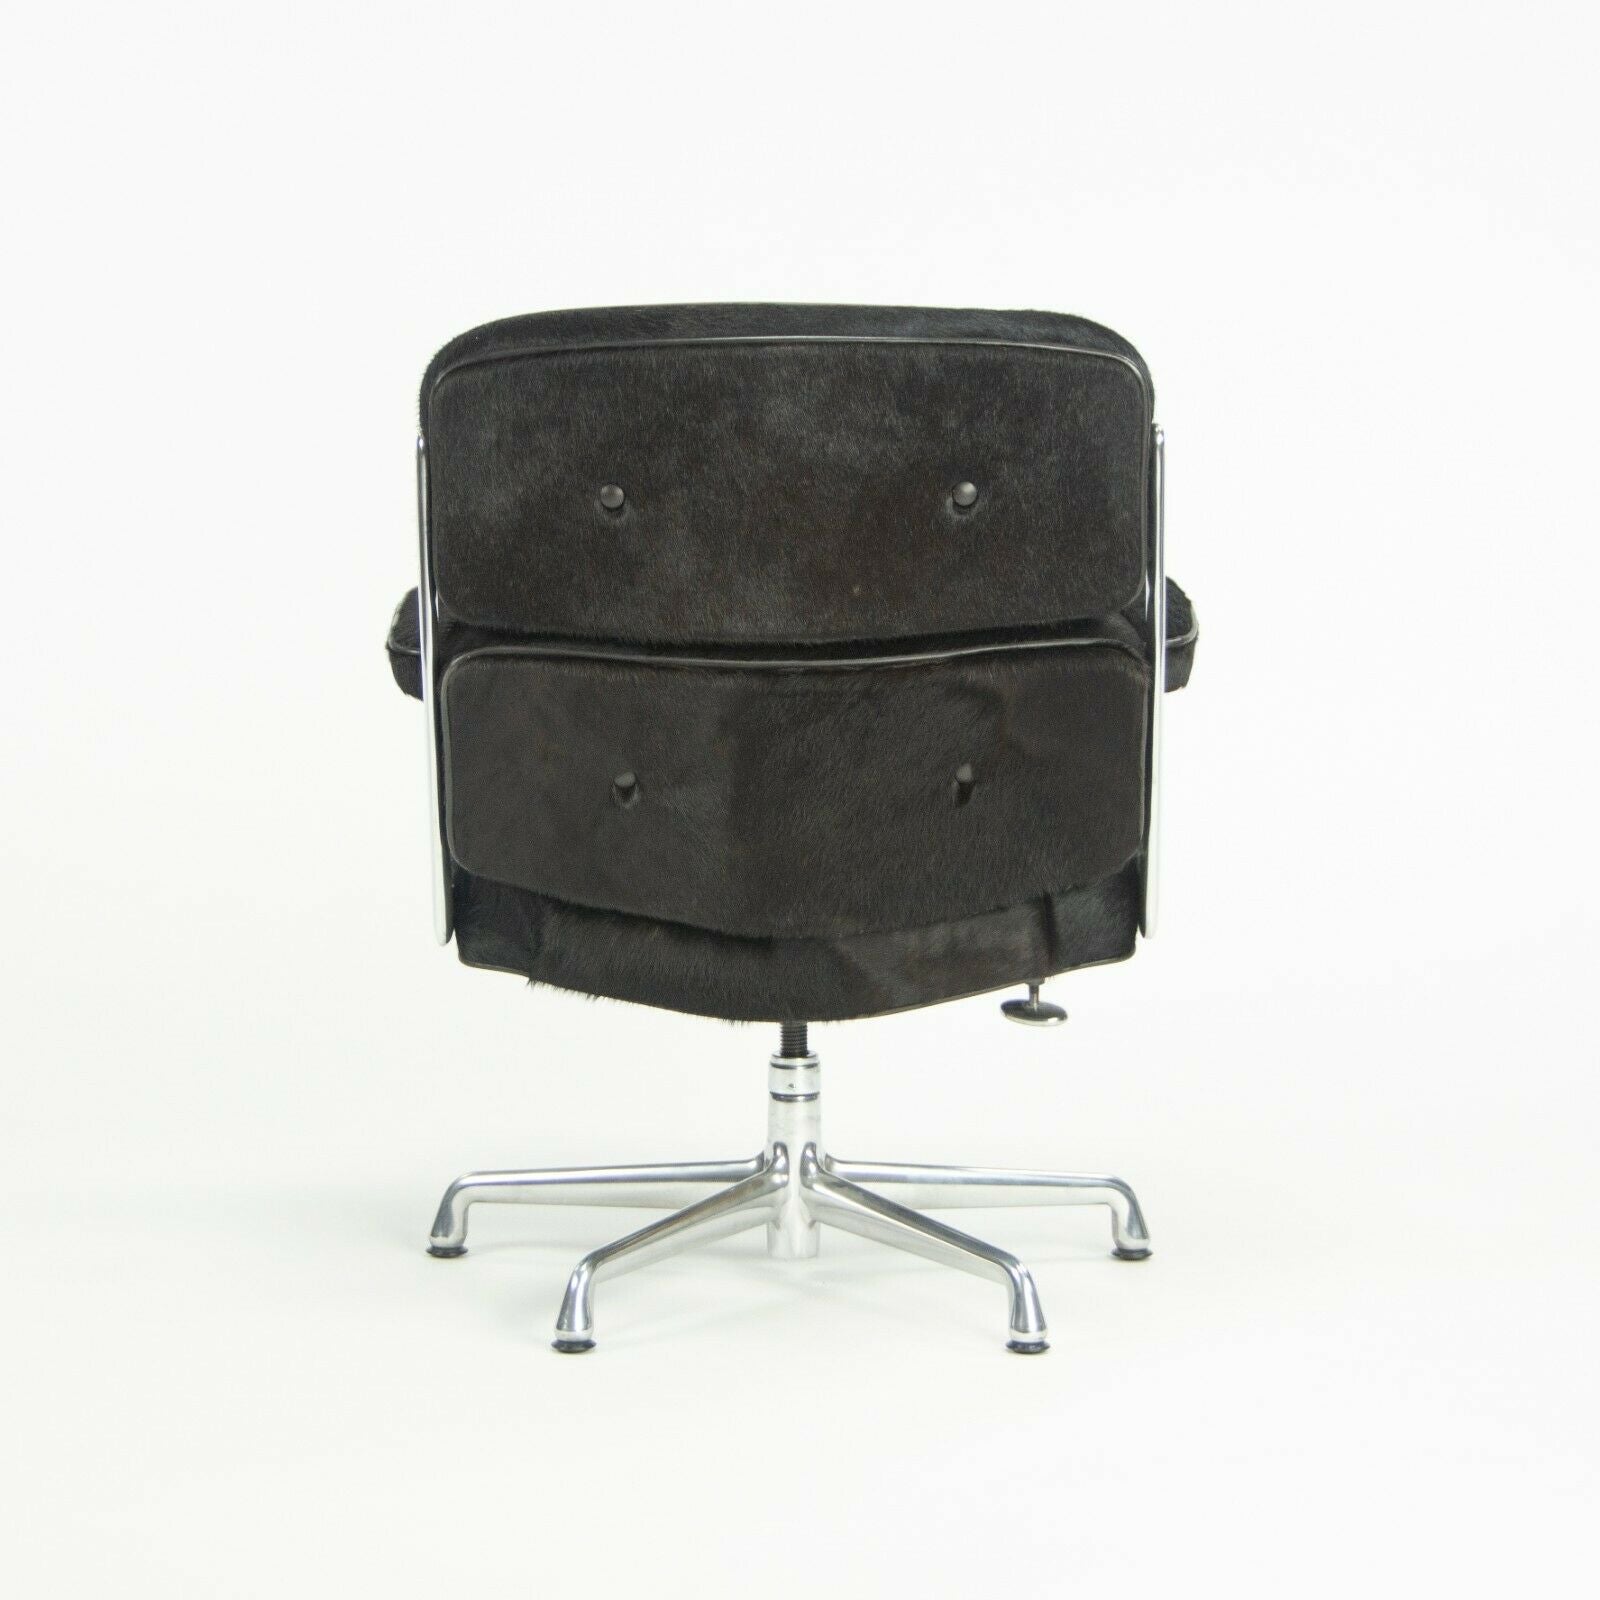 SOLD 2010 Herman Miller Eames Time Life Executive Desk Chair with Hair On Black Pony Hide